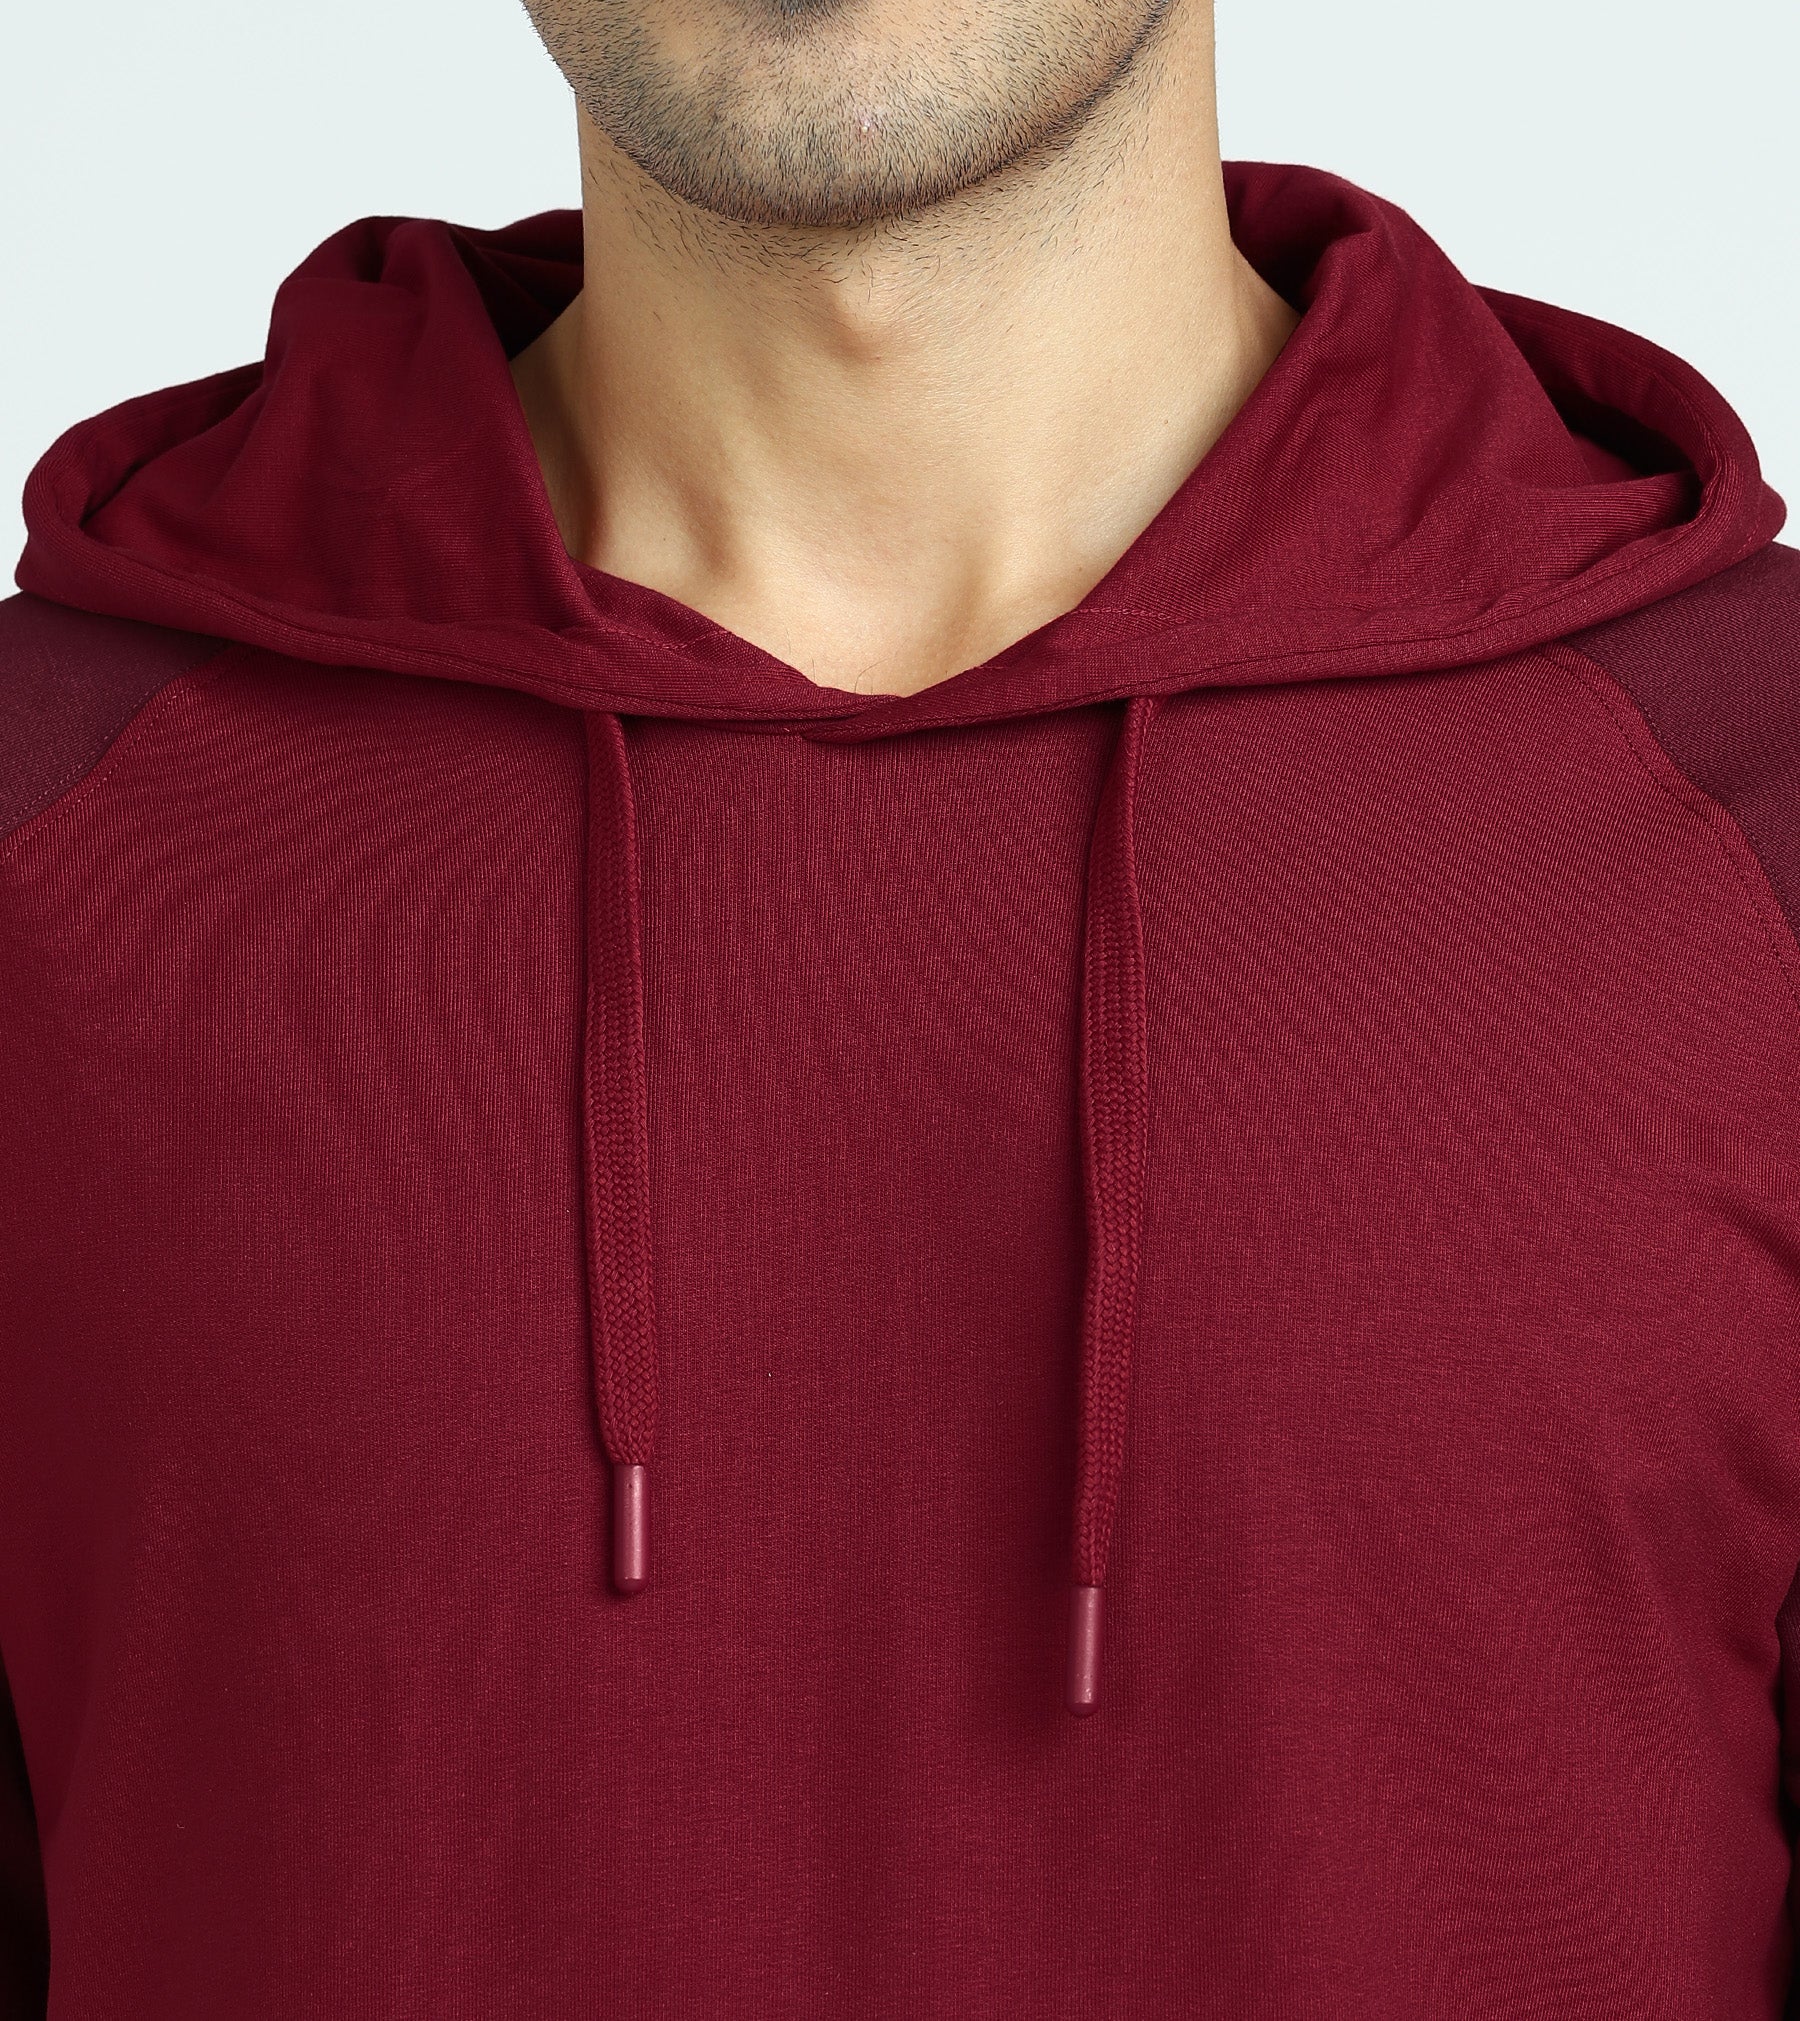 Quest French Terry Cotton-Blend Hoodies Set For Men Scarlet Red - XYXX Mens Apparels